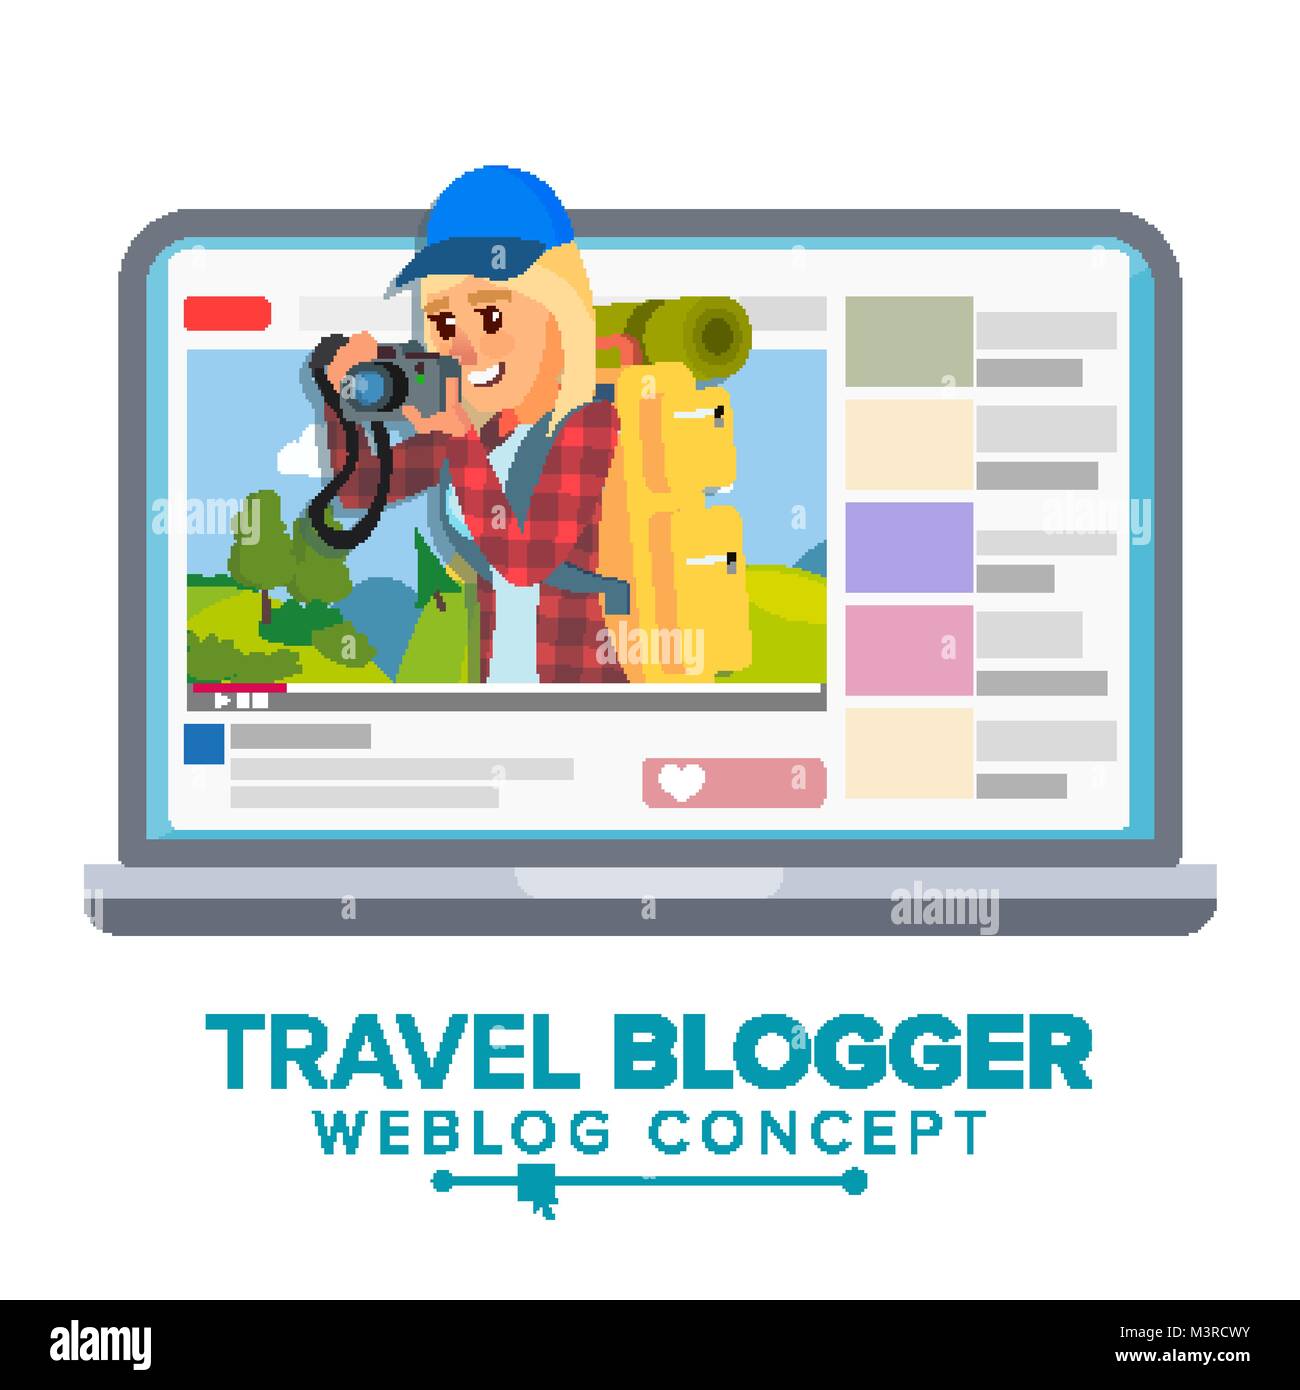 Travel Weblog Concept Vector. Personal Blog About Tourism And Hiking. Blogosphere Online. Girl Videoblogger. Isolated Flat Cartoon Illustration Stock Vector